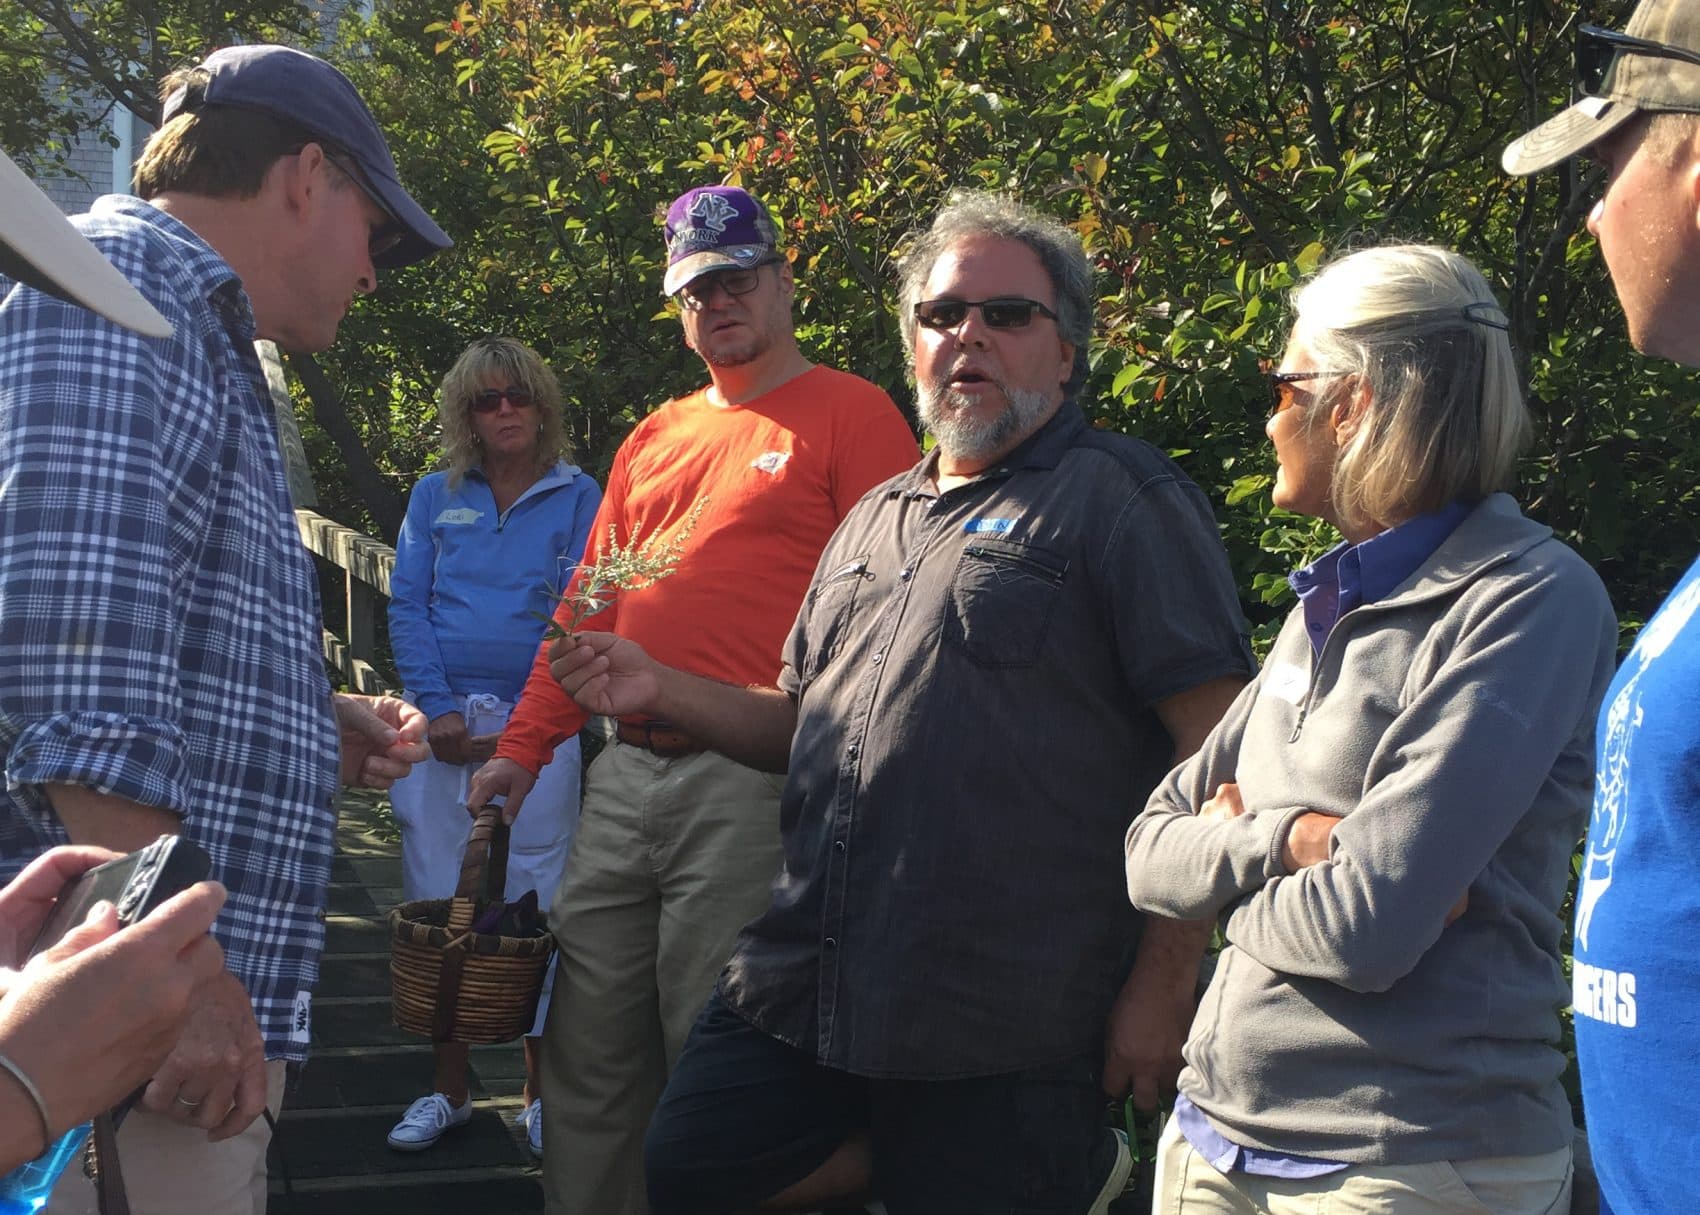 John Forti, director of horticulture and education at Massachusetts Horticultural Society, leads a foraging expedition on Appledore Island. (Courtesy Amy Sherwood)